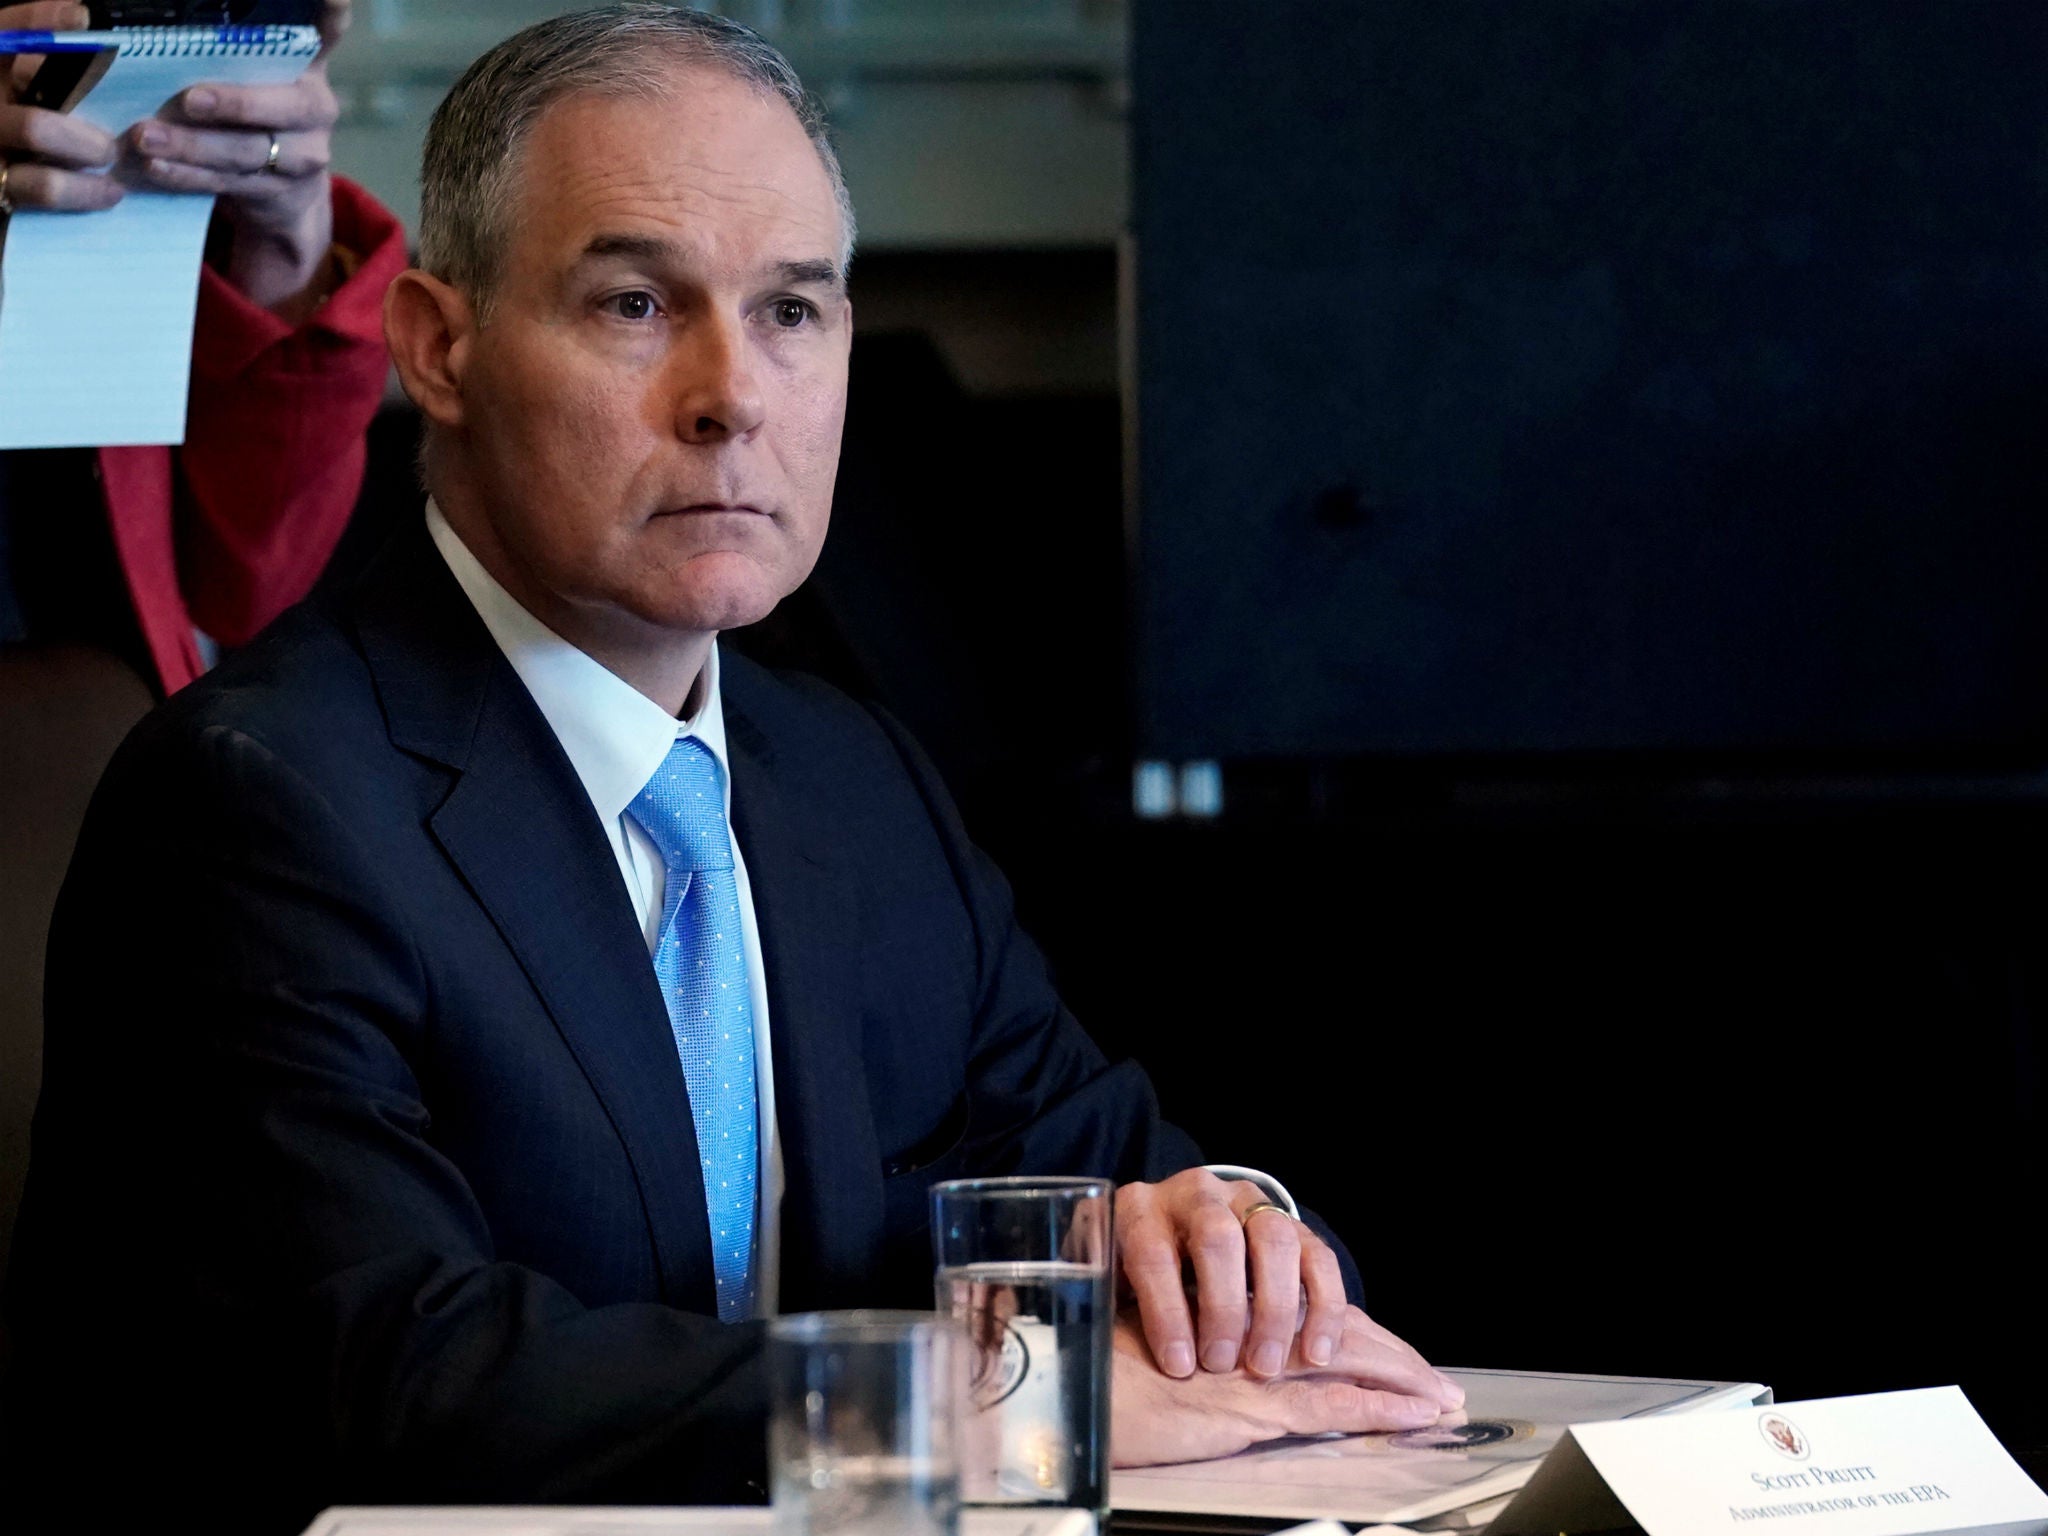 US Environmental Protection Agency administrator Scott Pruitt is the latest member of Donald Trump's Cabinet to be confronted by a concerned citizen in public.